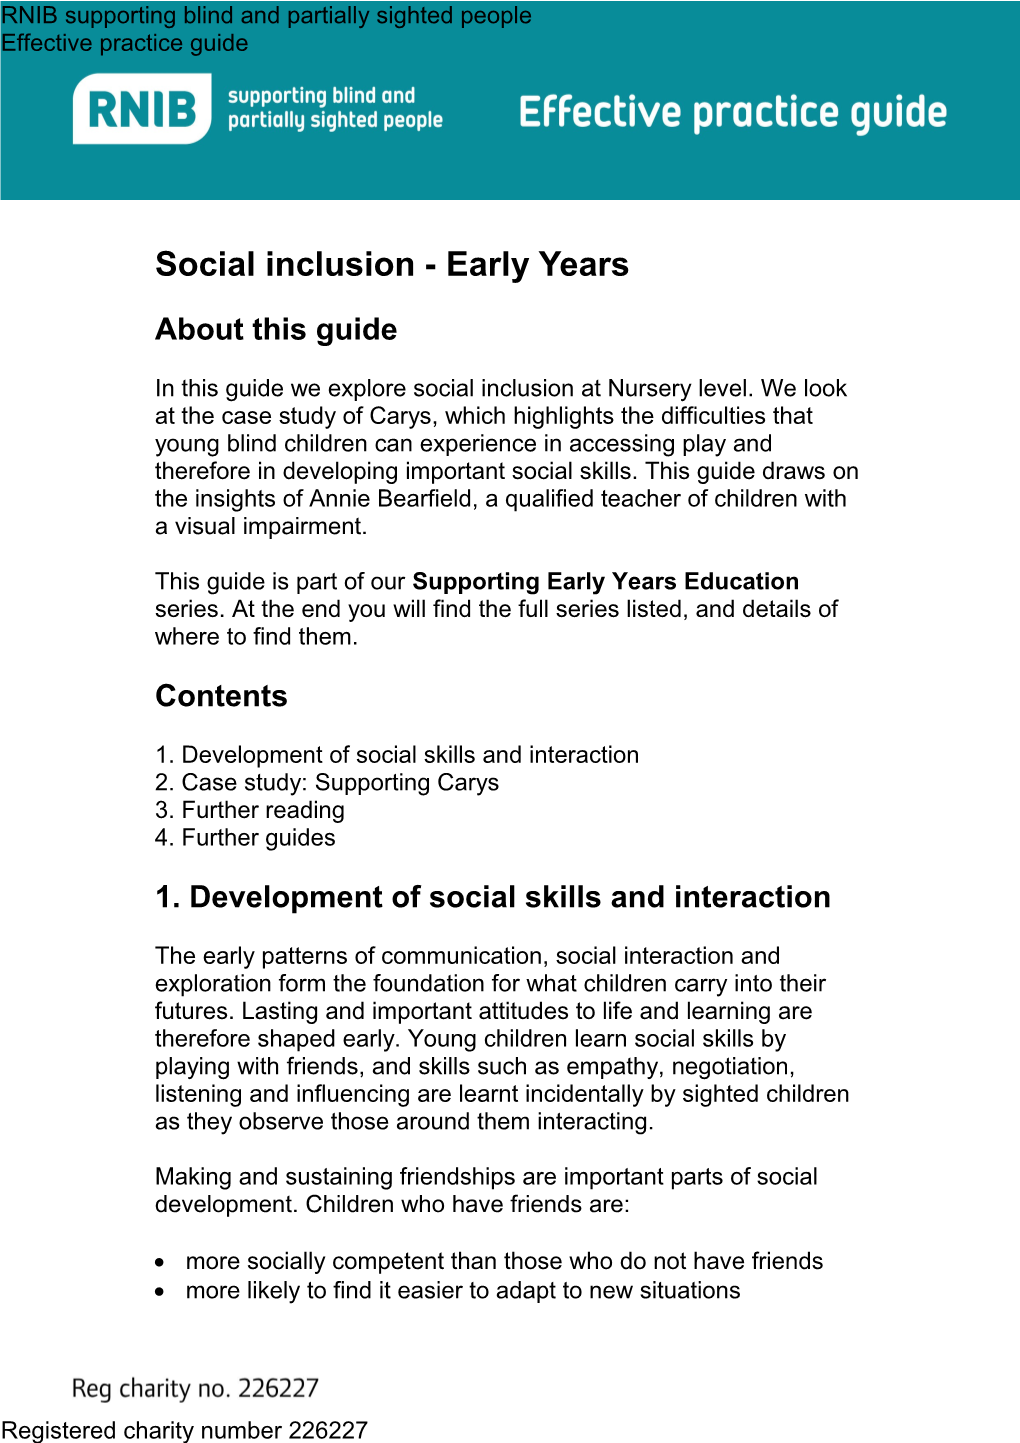 Social Inclusion Early Years